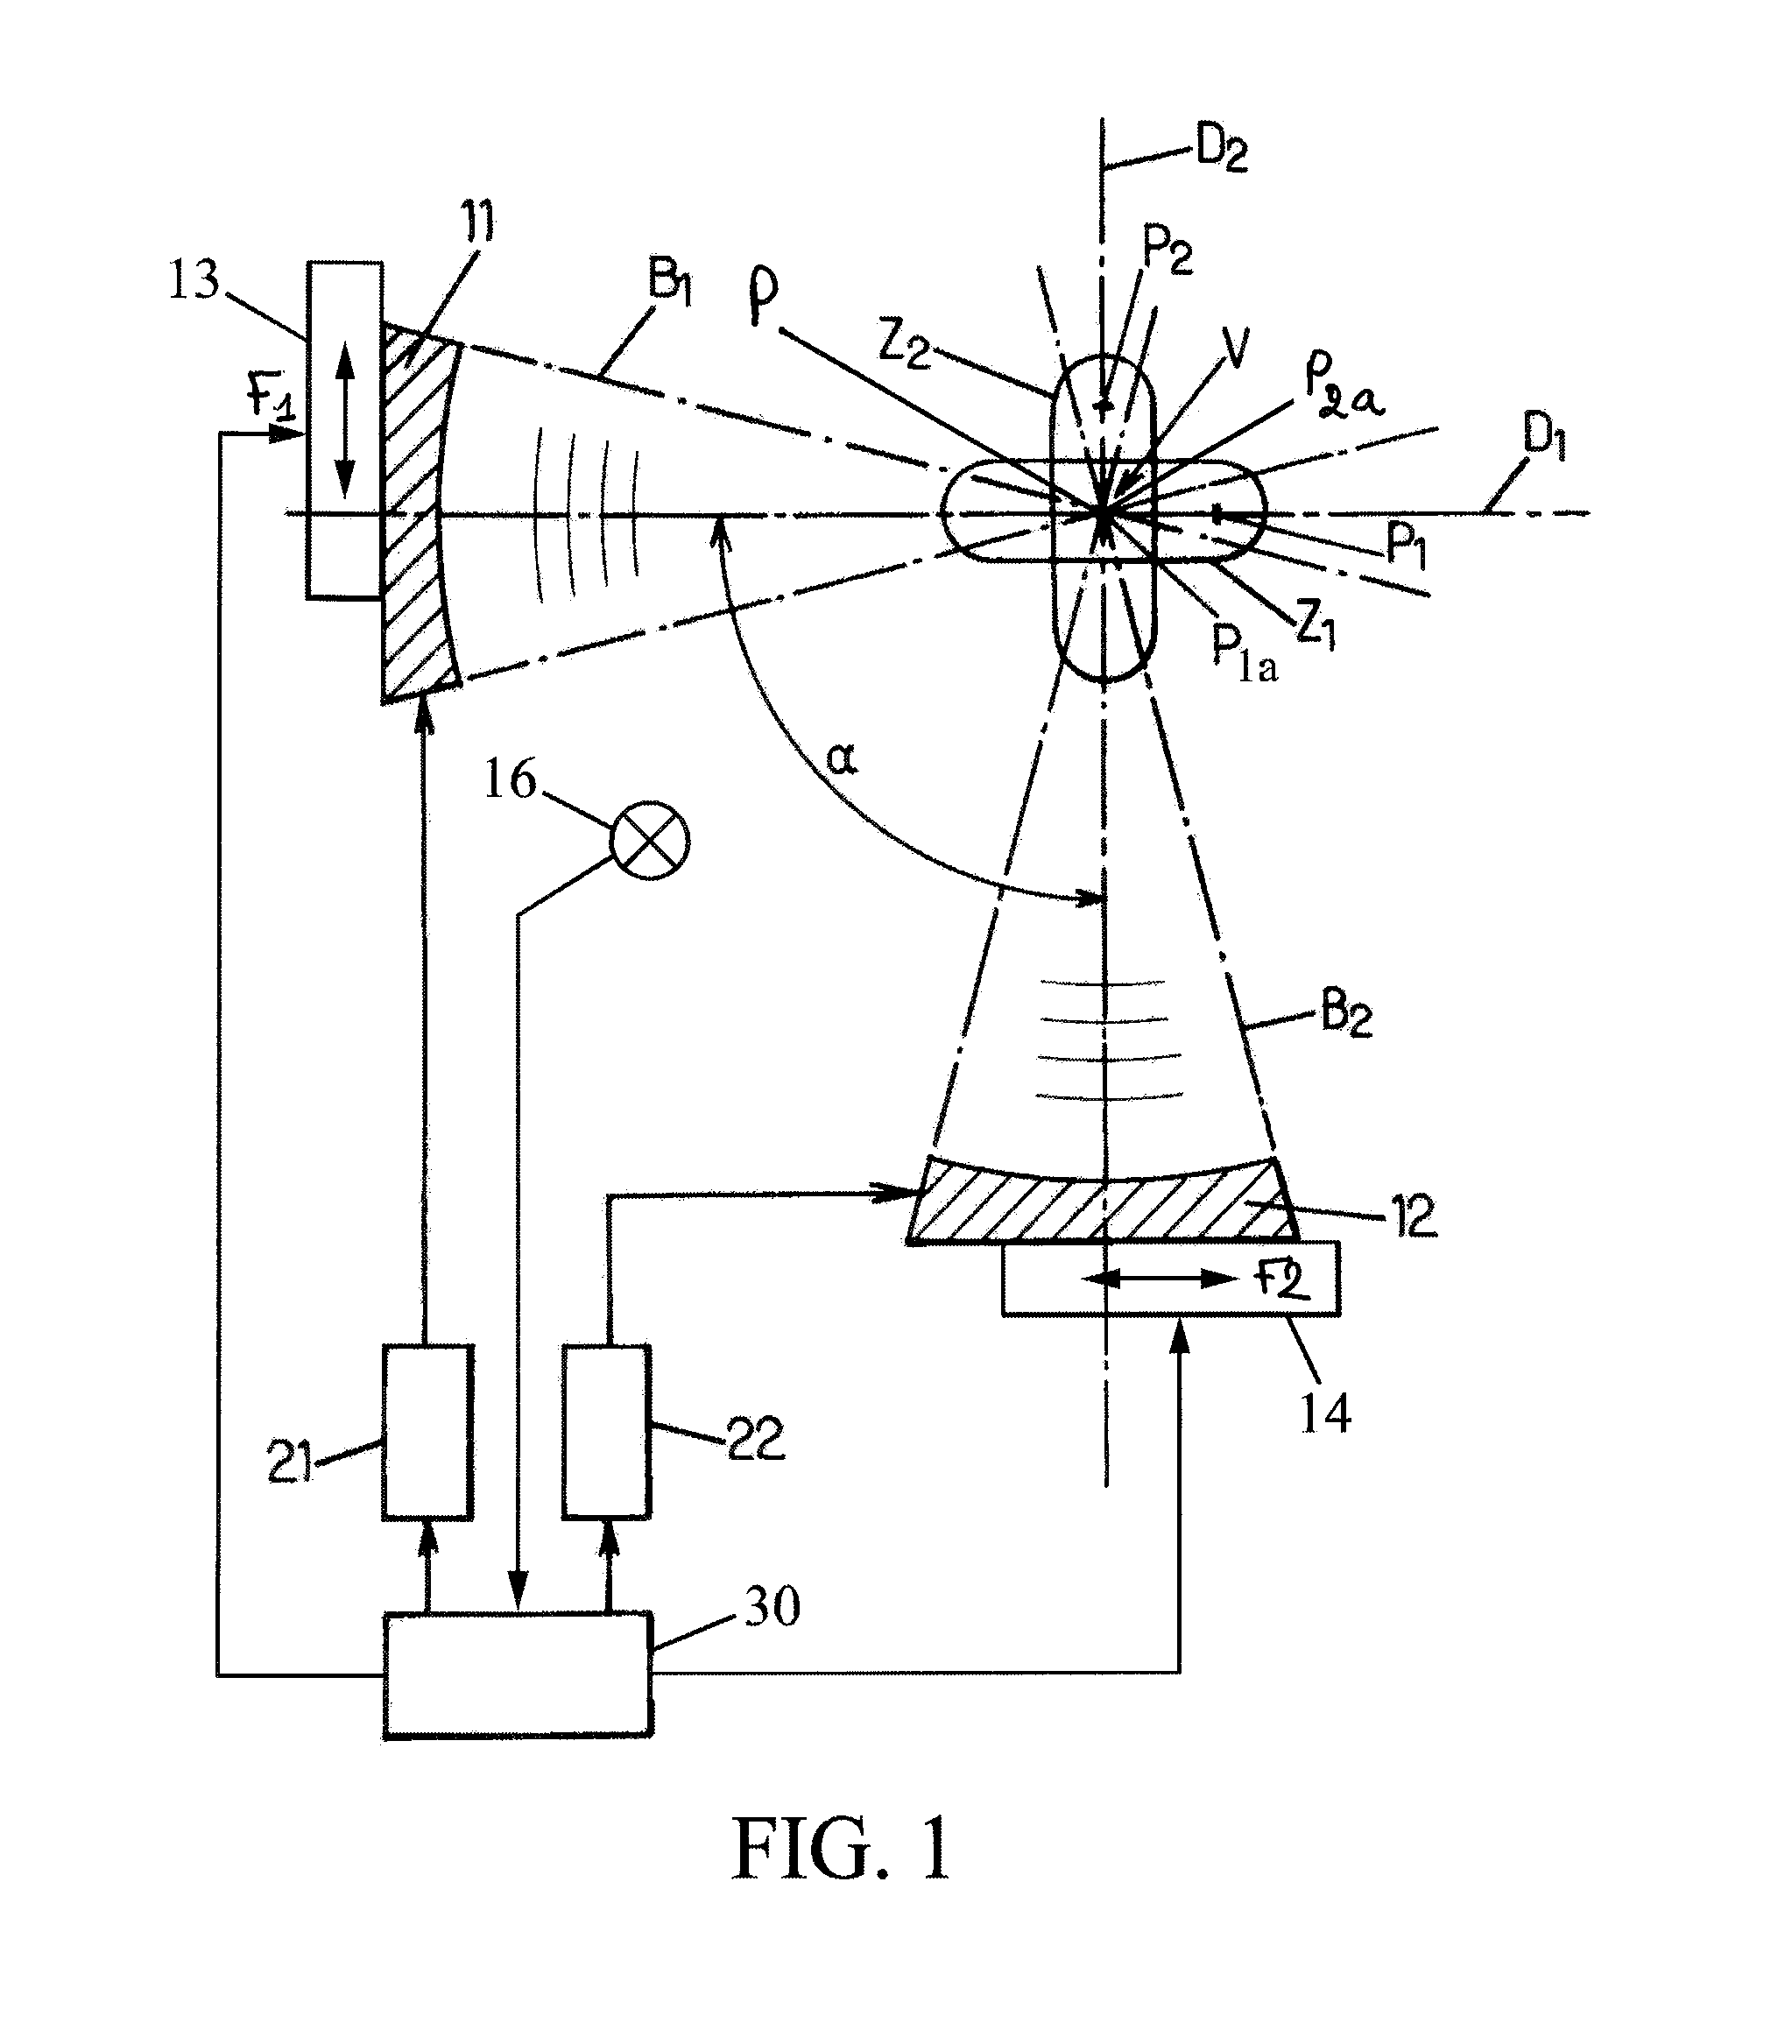 Method for determining optimized parameters of a device generating a plurality of ultrasound beams focused in a region of interest